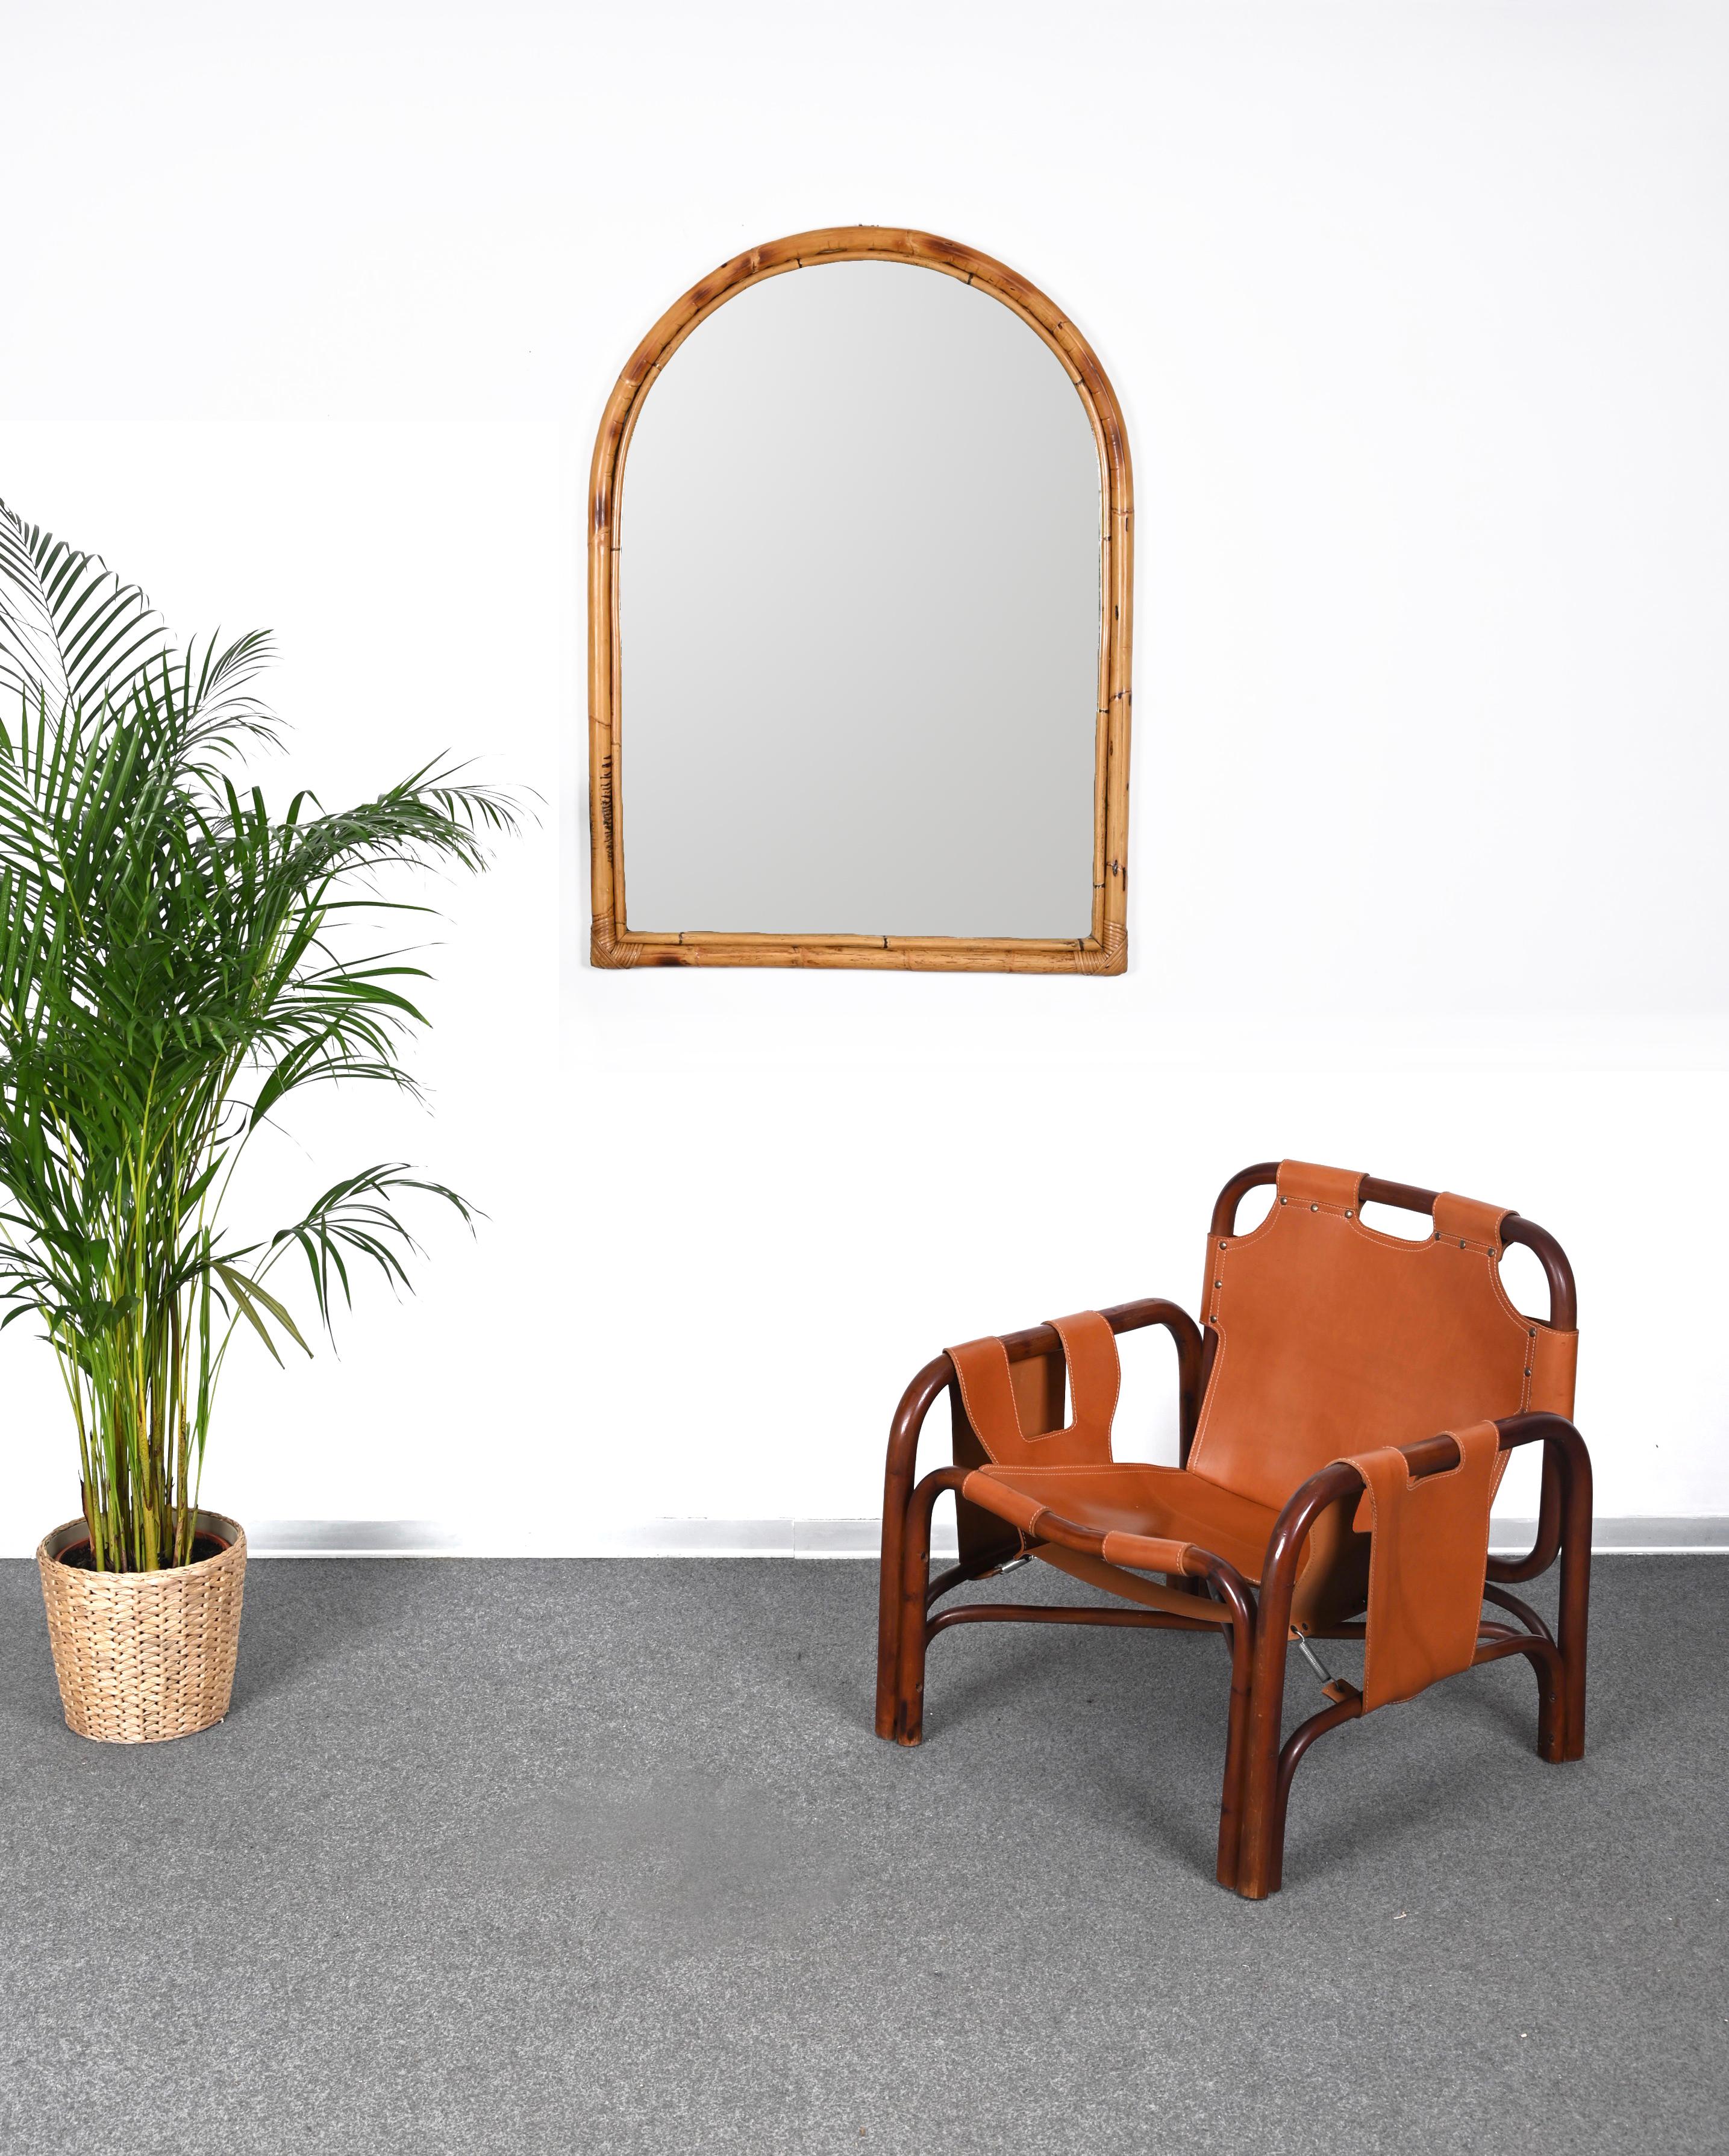 Wonderful large midcentury arched mirror with double bamboo frame. This fantastic rare mirror was produced in Italy in the 1970s.

The way the two round bamboo lines and the glass integrate through the sinusoidal wickerwork is superb and gives